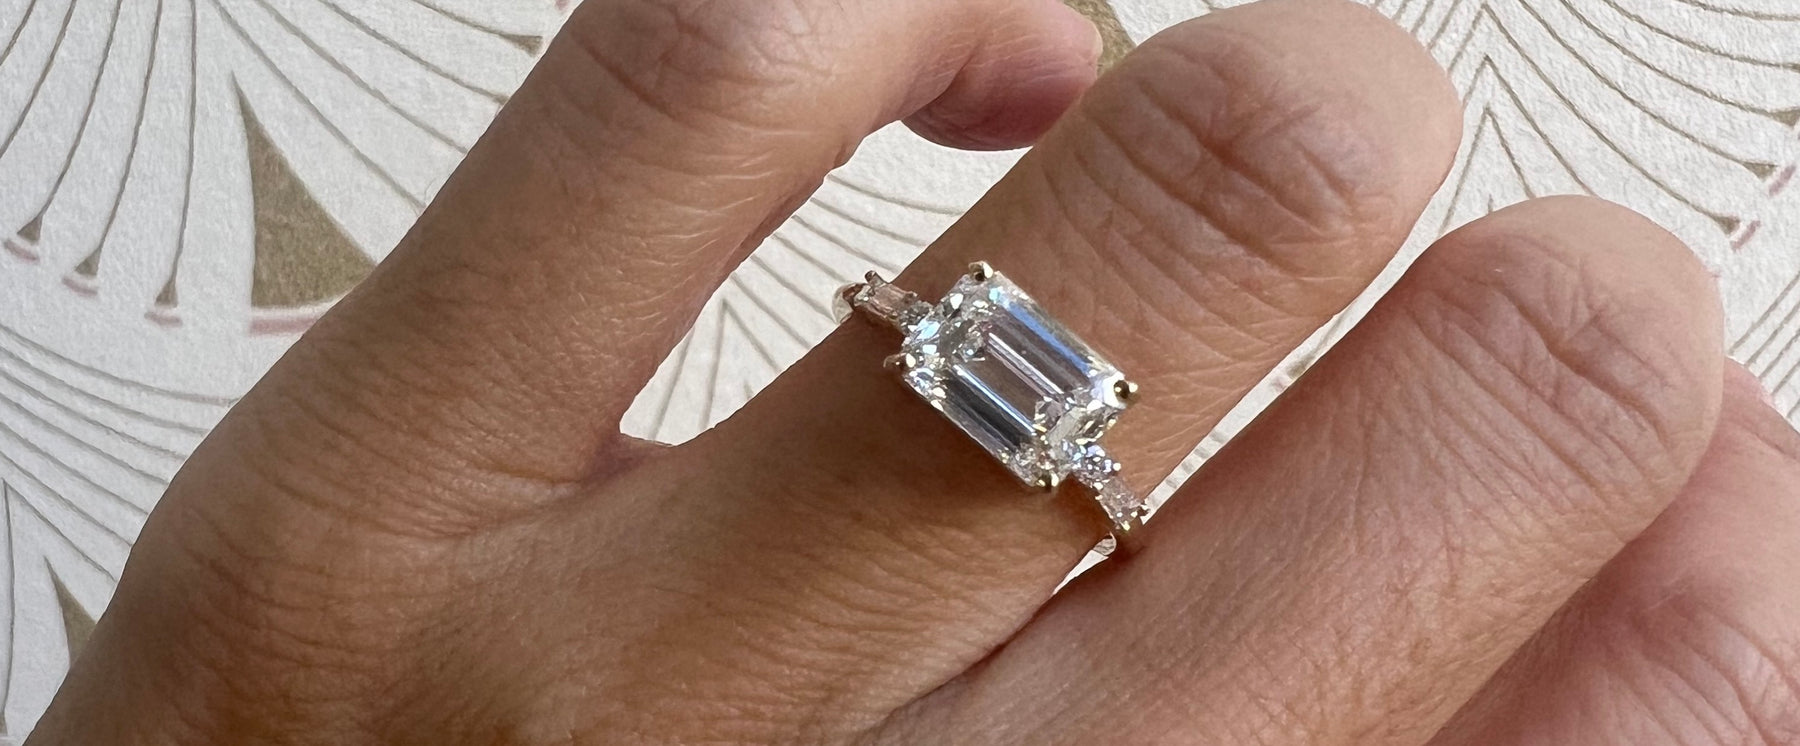 14k white gold custom engagement ring with emerald cut white diamond center stone, baguette diamonds and pave diamonds